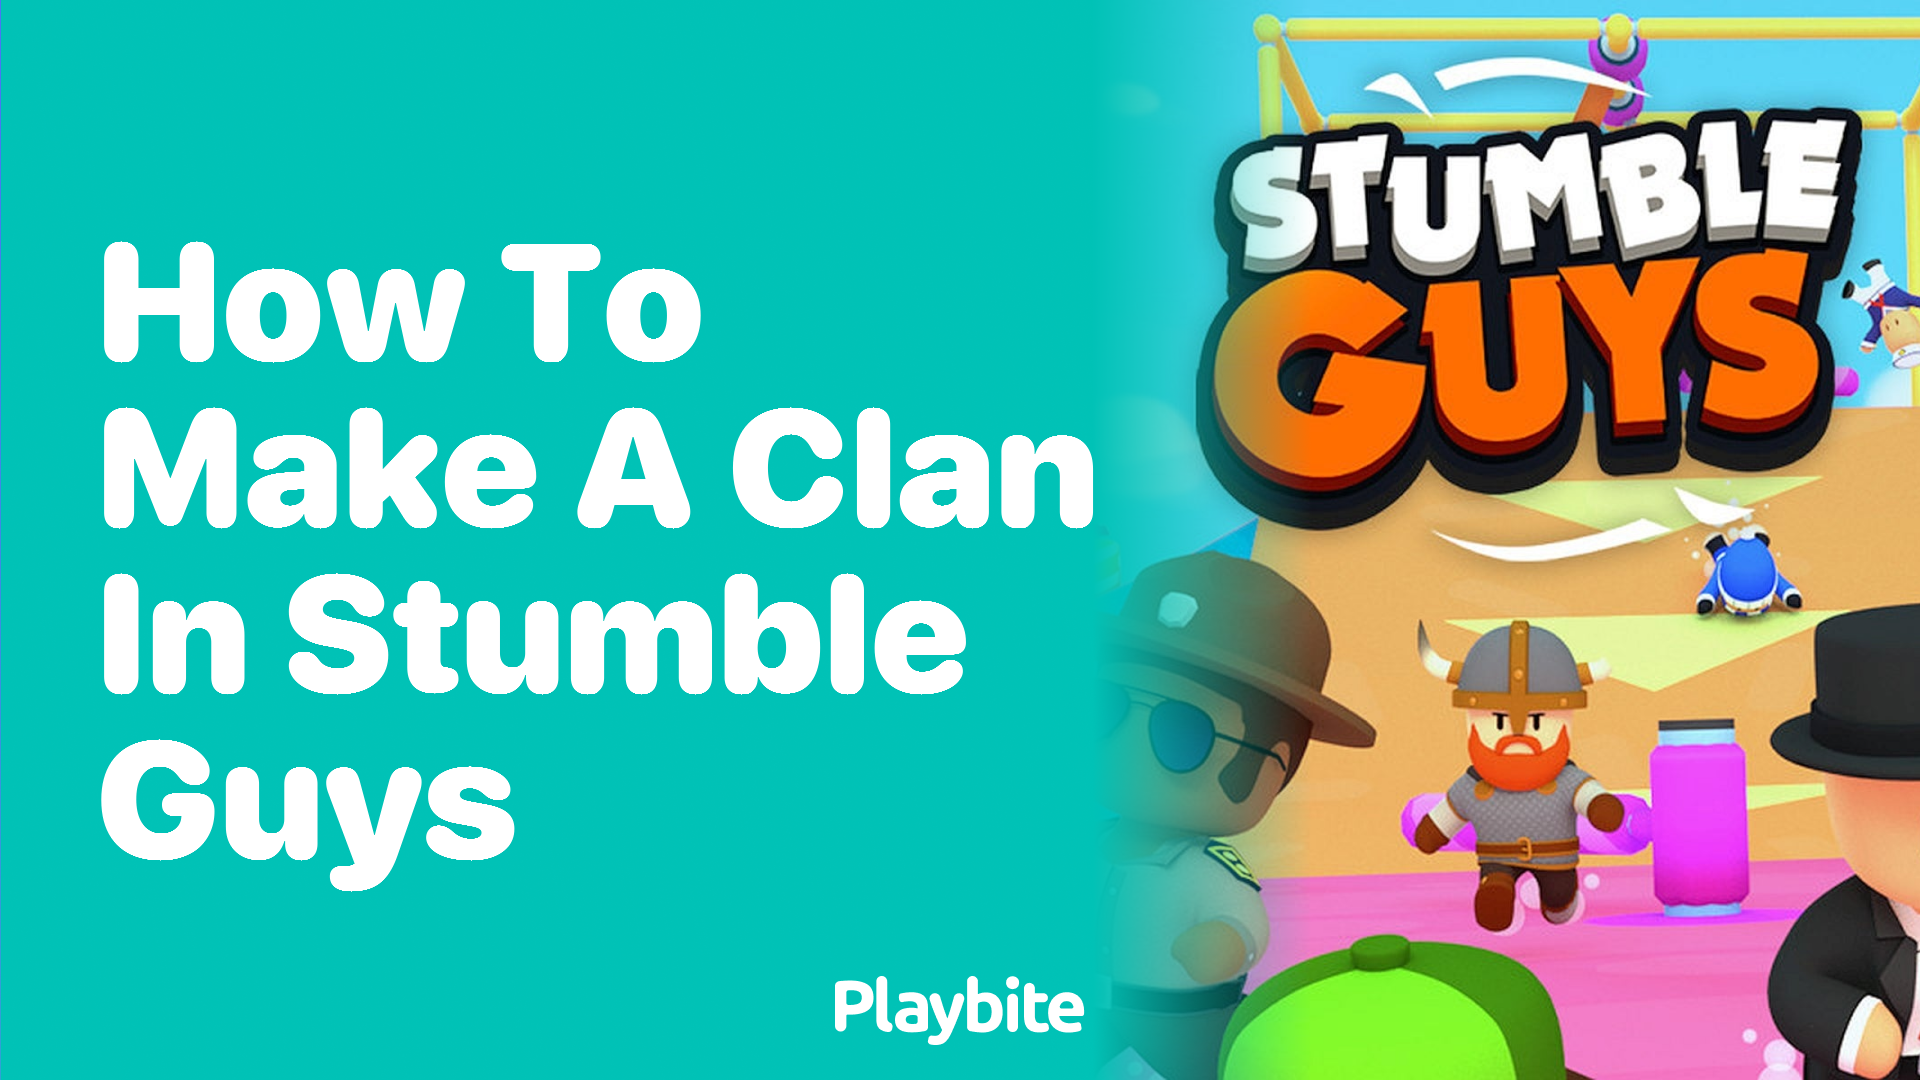 How to Make a Clan in Stumble Guys: A Quick Guide